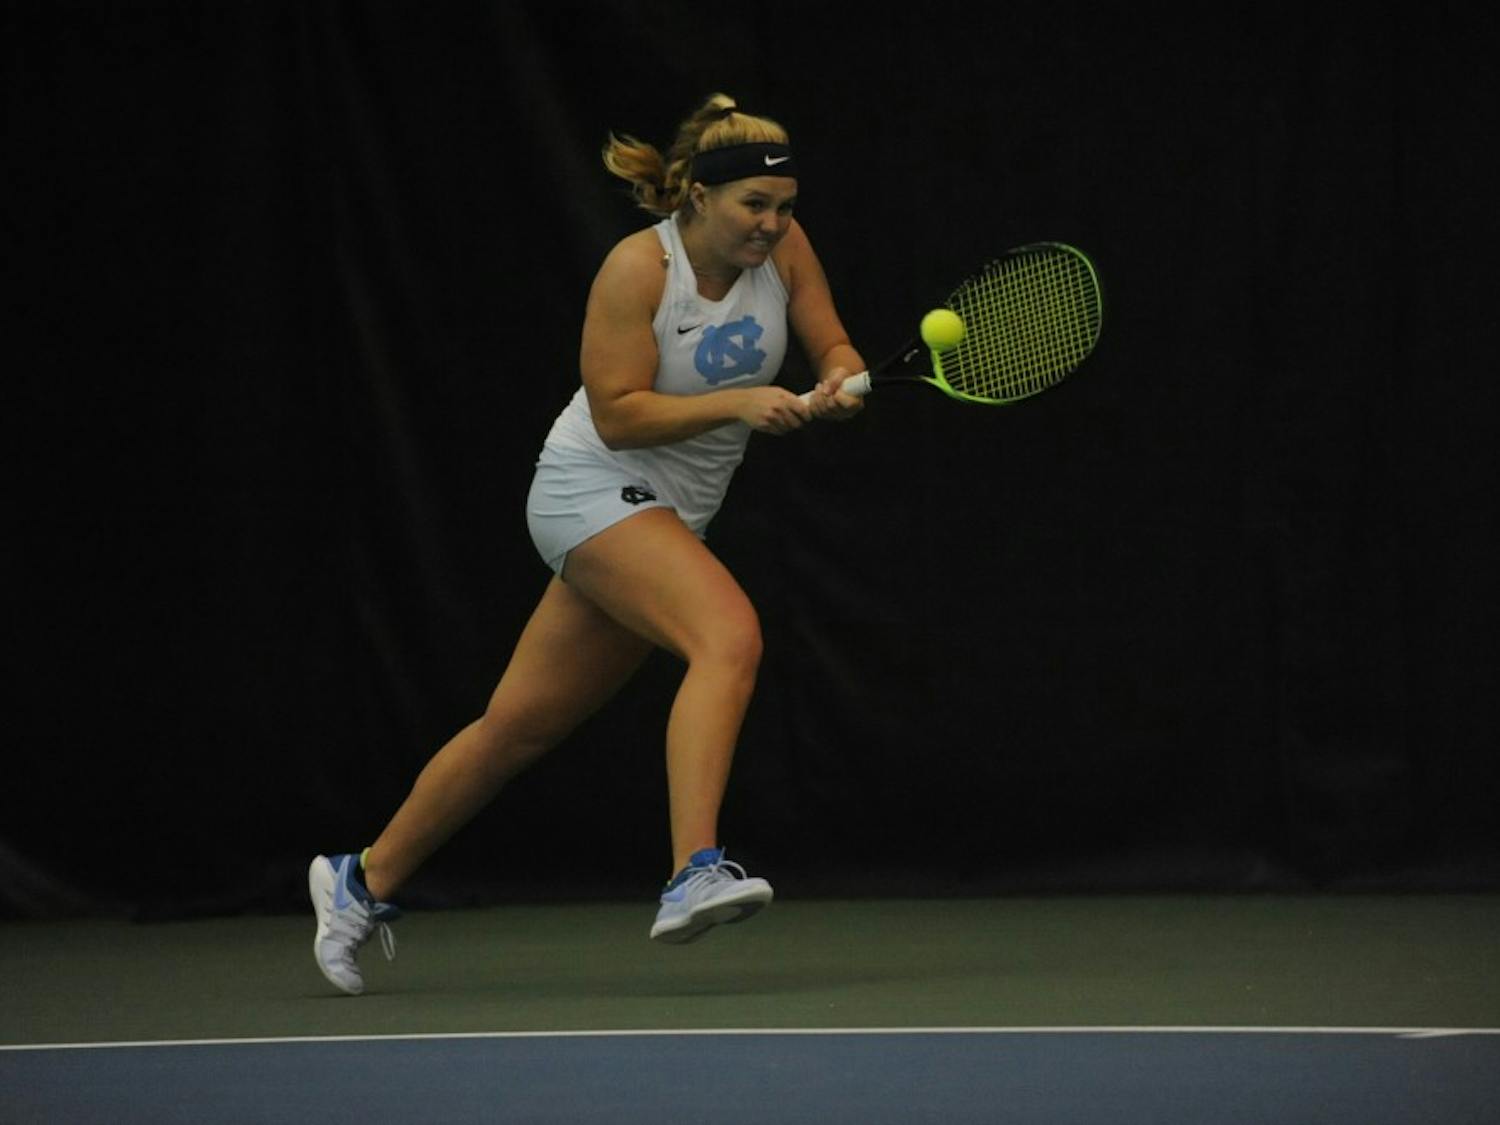 UNC women's tennis sophomore Alele Sanford prepares to return a ball during a singles match against Louisville on Sunday, March 3, 2019. UNC won the match against the Cardinals.&nbsp;